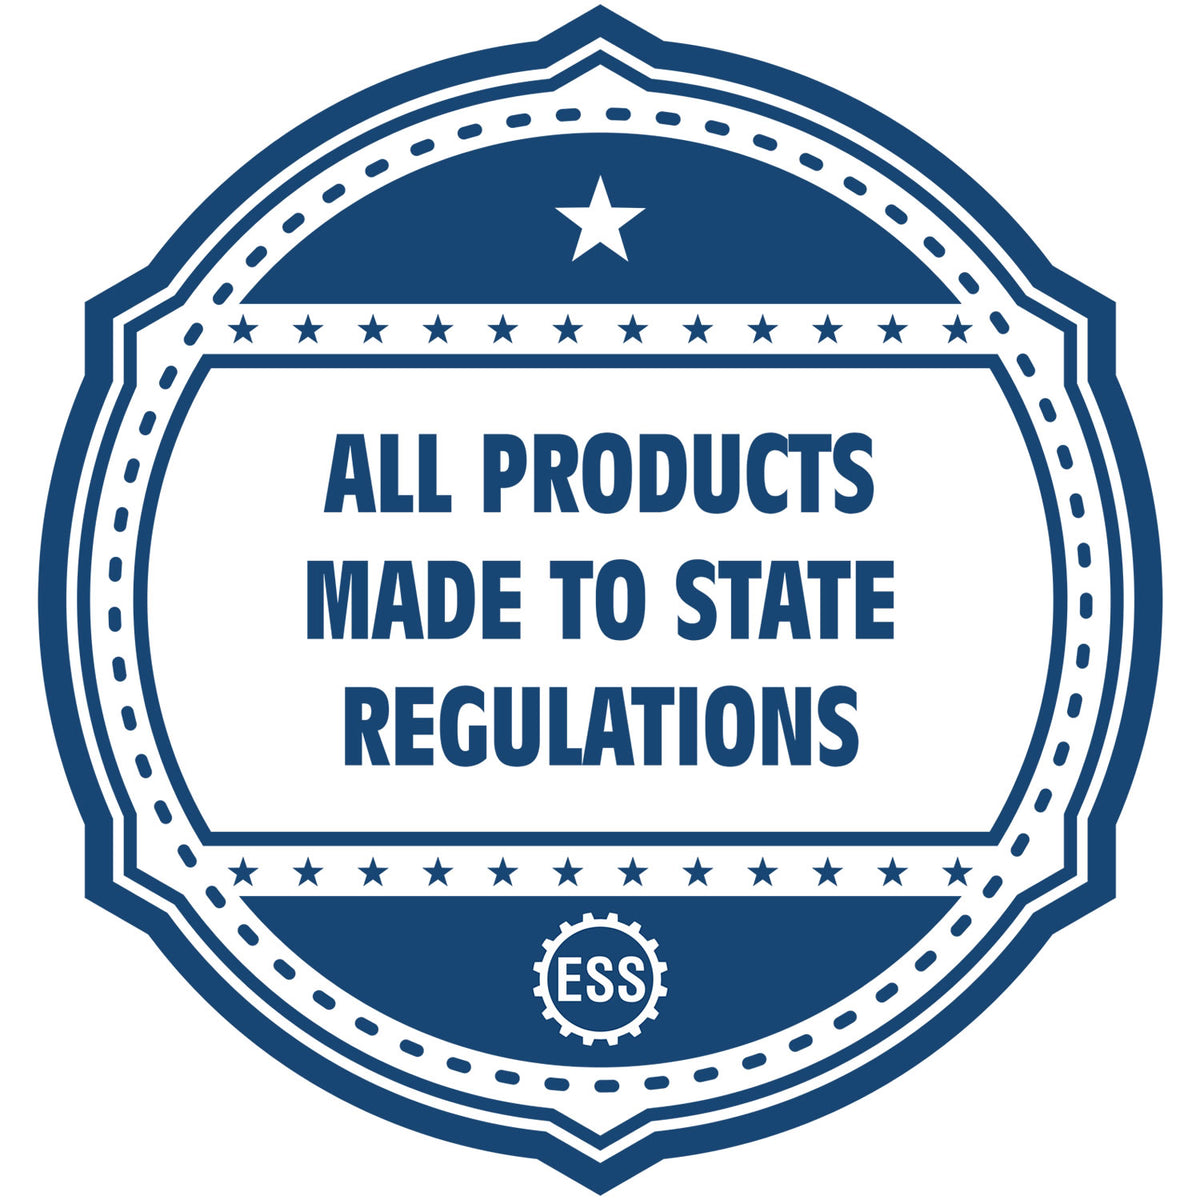 An icon or badge element for the State of Indiana Long Reach Architectural Embossing Seal showing that this product is made in compliance with state regulations.